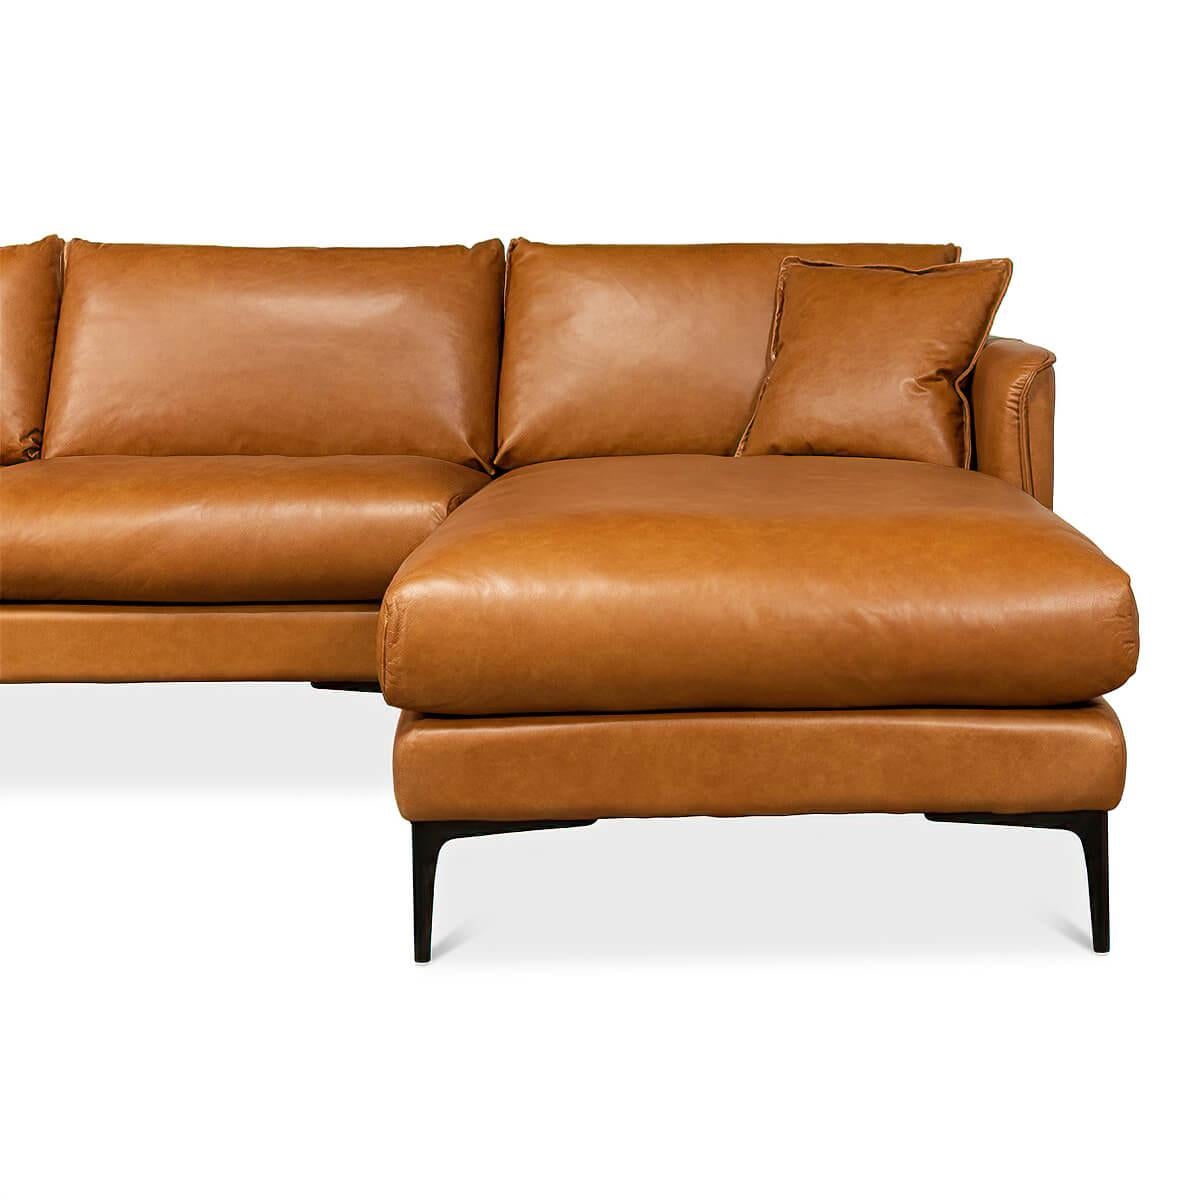 Contemporary Mid Century Leather Section, to the Right